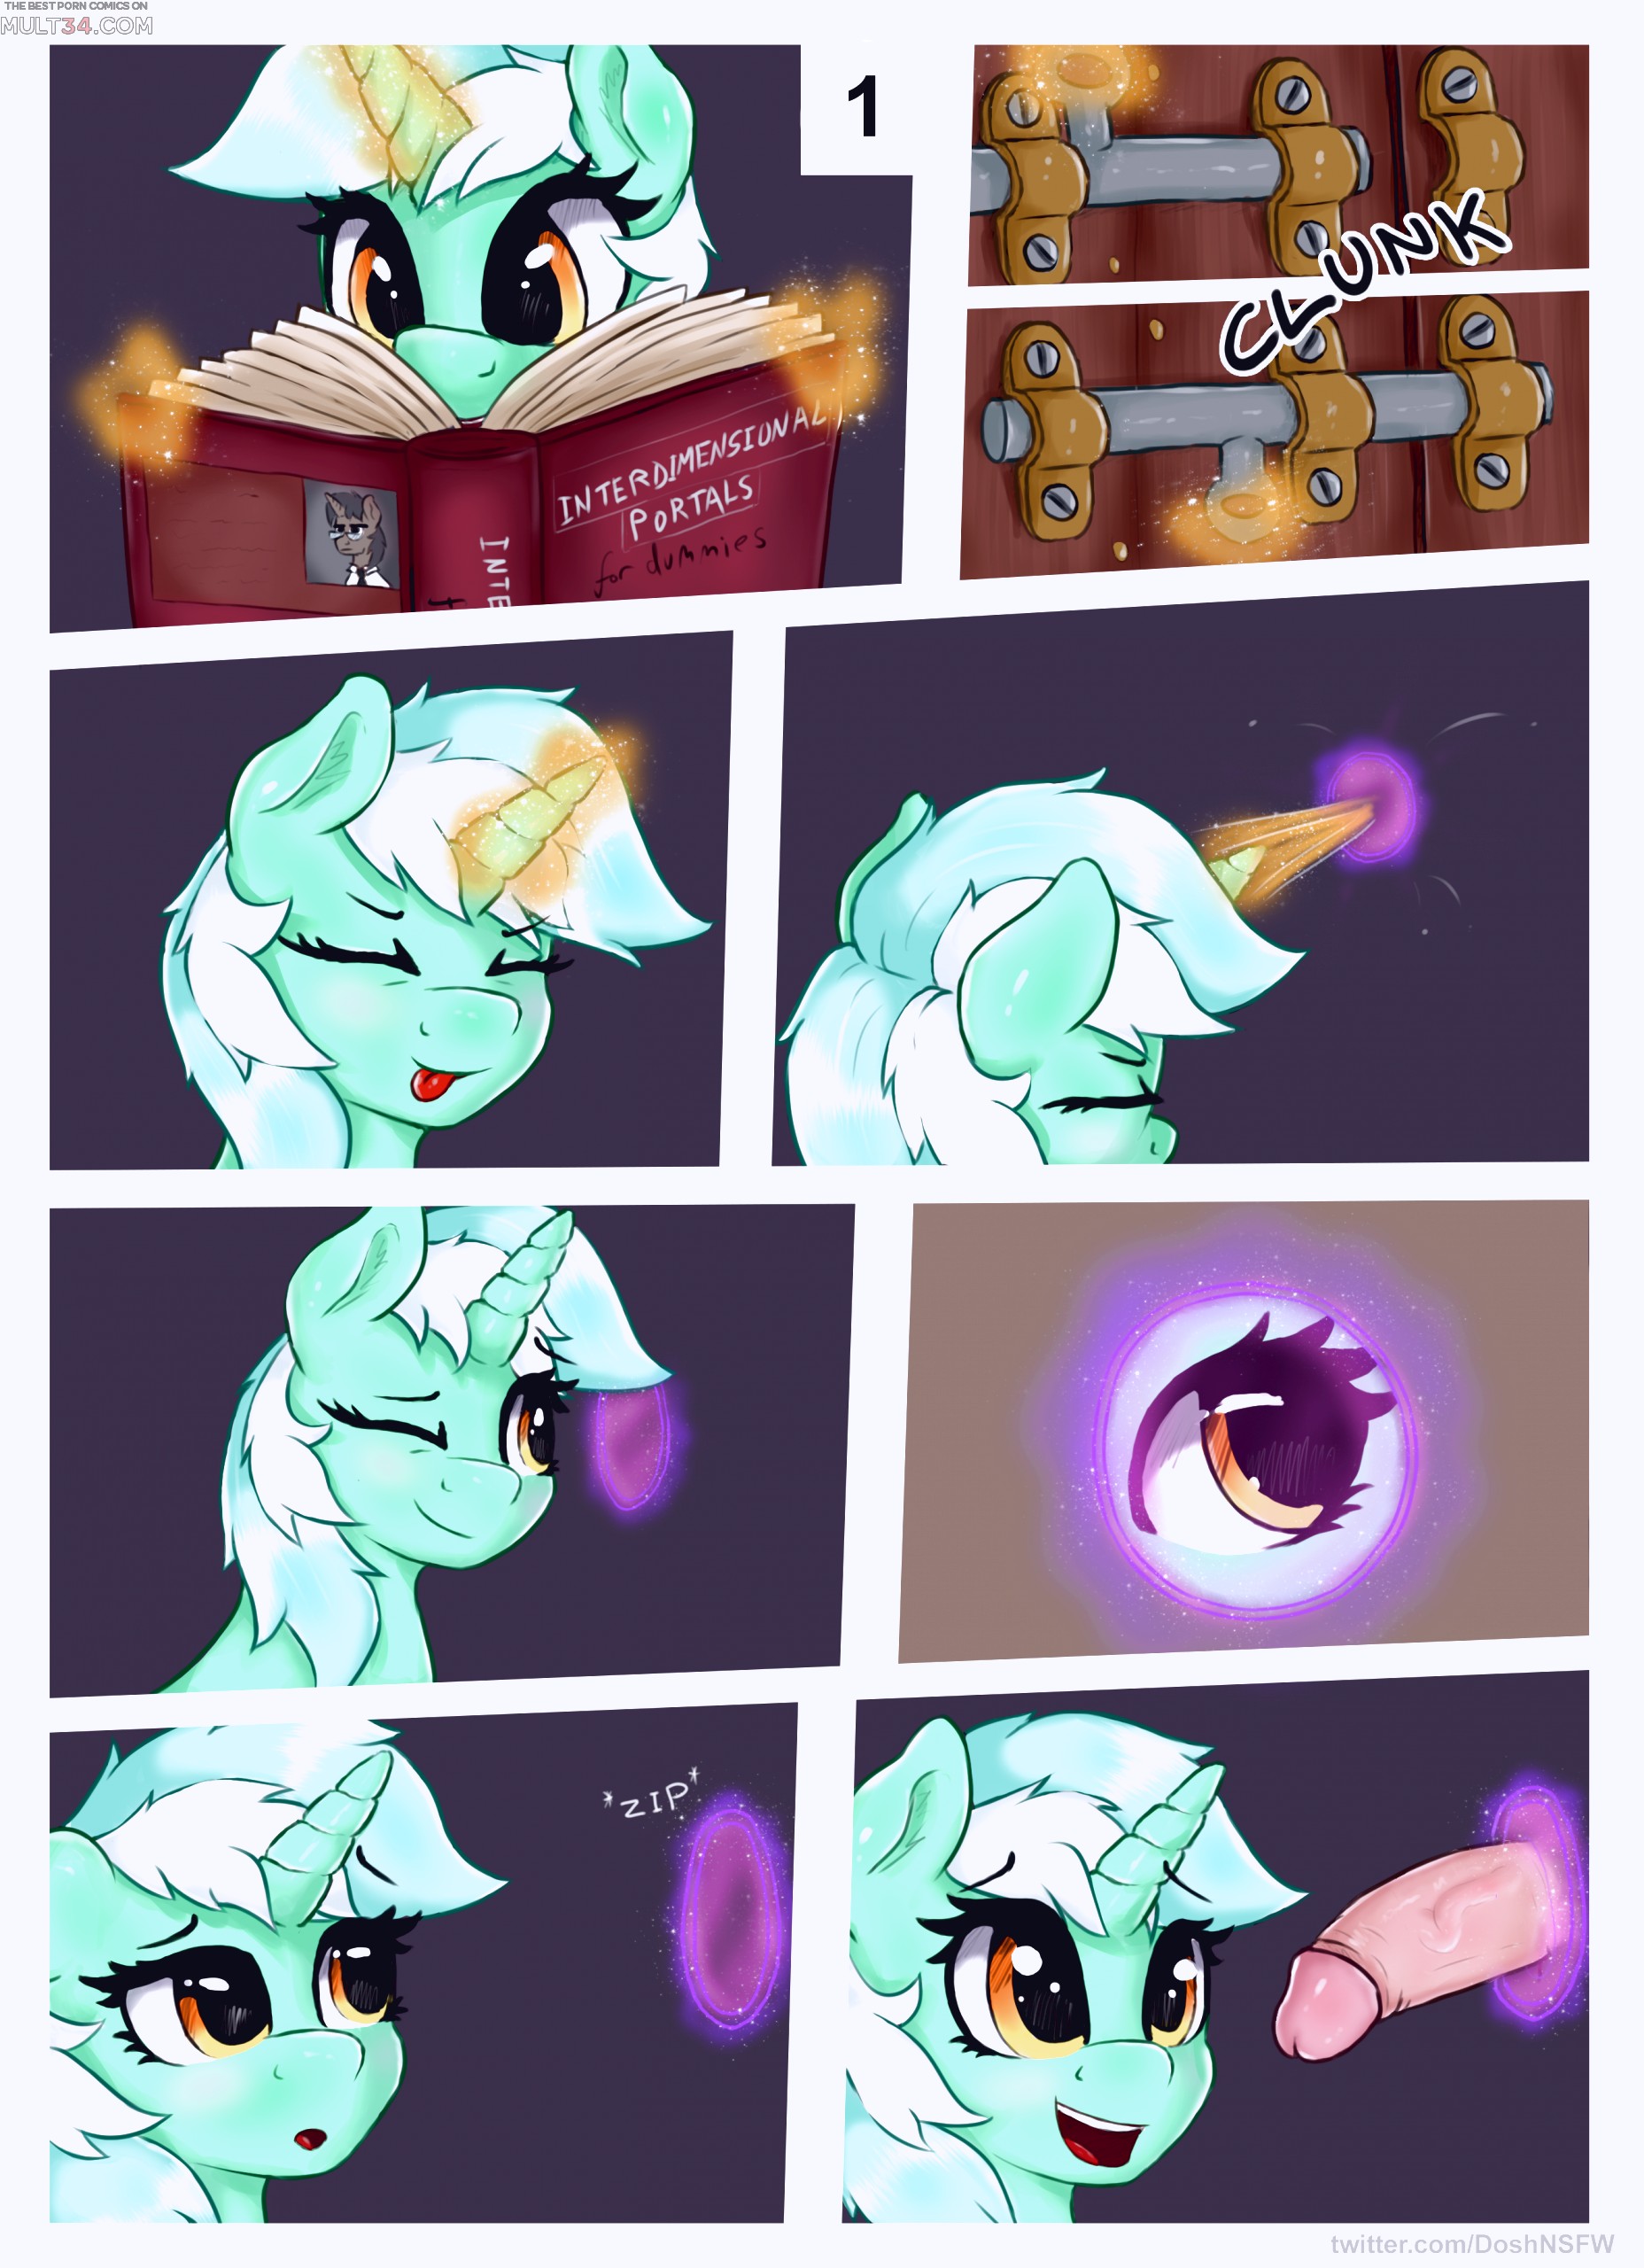 Interdimensional Portals porn comic page 1 on category My Little Pony